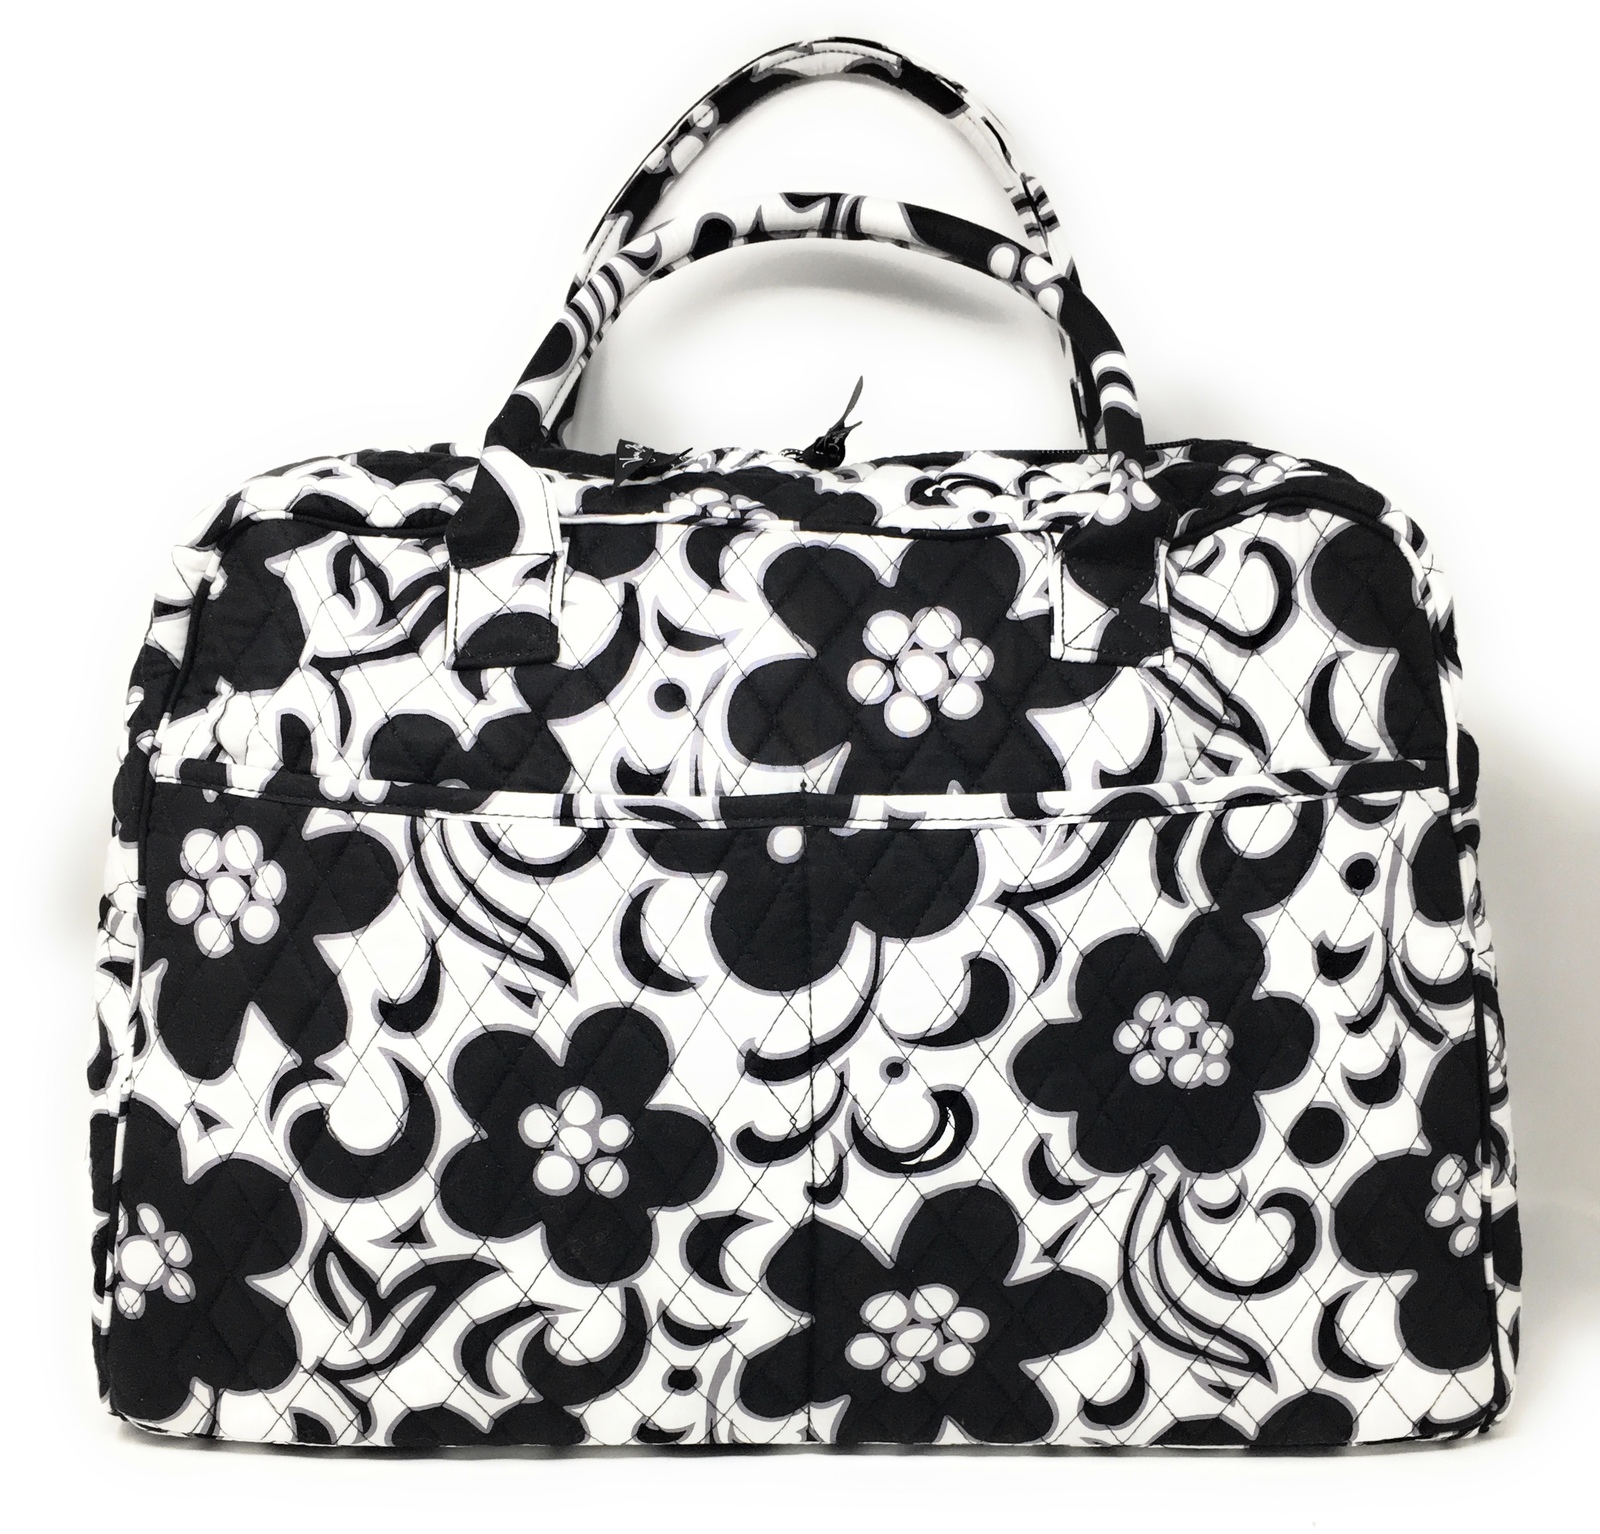 Primary image for Vera Bradley Weekender Tote - Night & Day - Solid Black Interior - New w/Defects